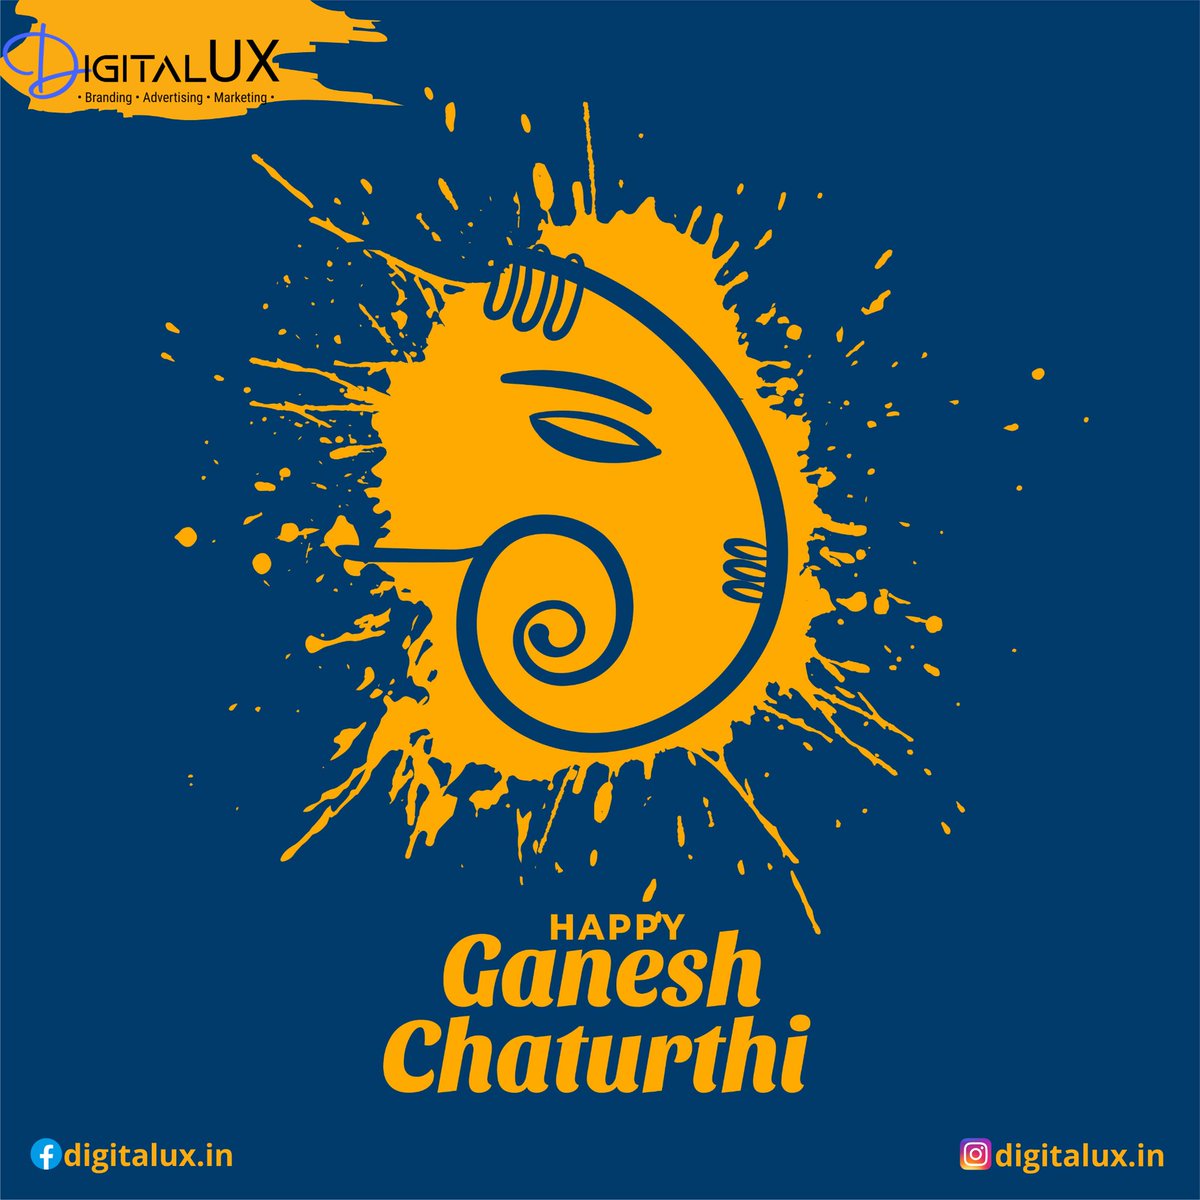 Wishing a beautiful, colourful and cheerful Ganesh Chaturthi to everyone…. May this festive occasion bring along many more smiles and many more celebrations for you.

#ganesh #chaturthi #pooja #vinayak #traditional #ganeshpooja  #ganeshchaturthi #digitalmarketing #digitalux #seo